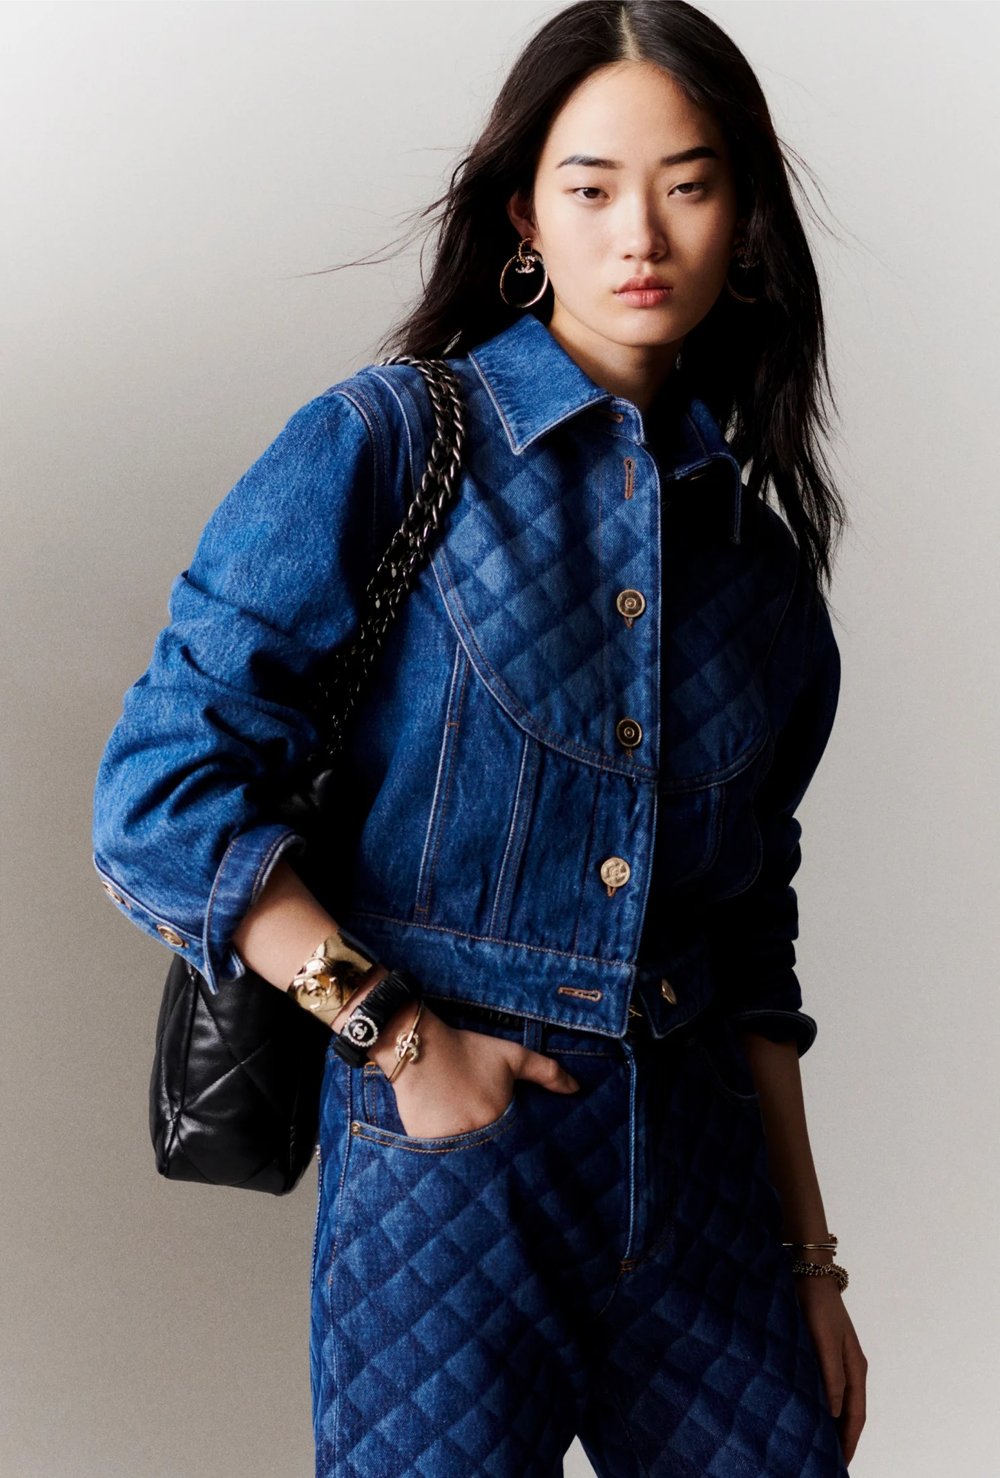 Chanel Quilted-Print Denim Jacket — UFO No More